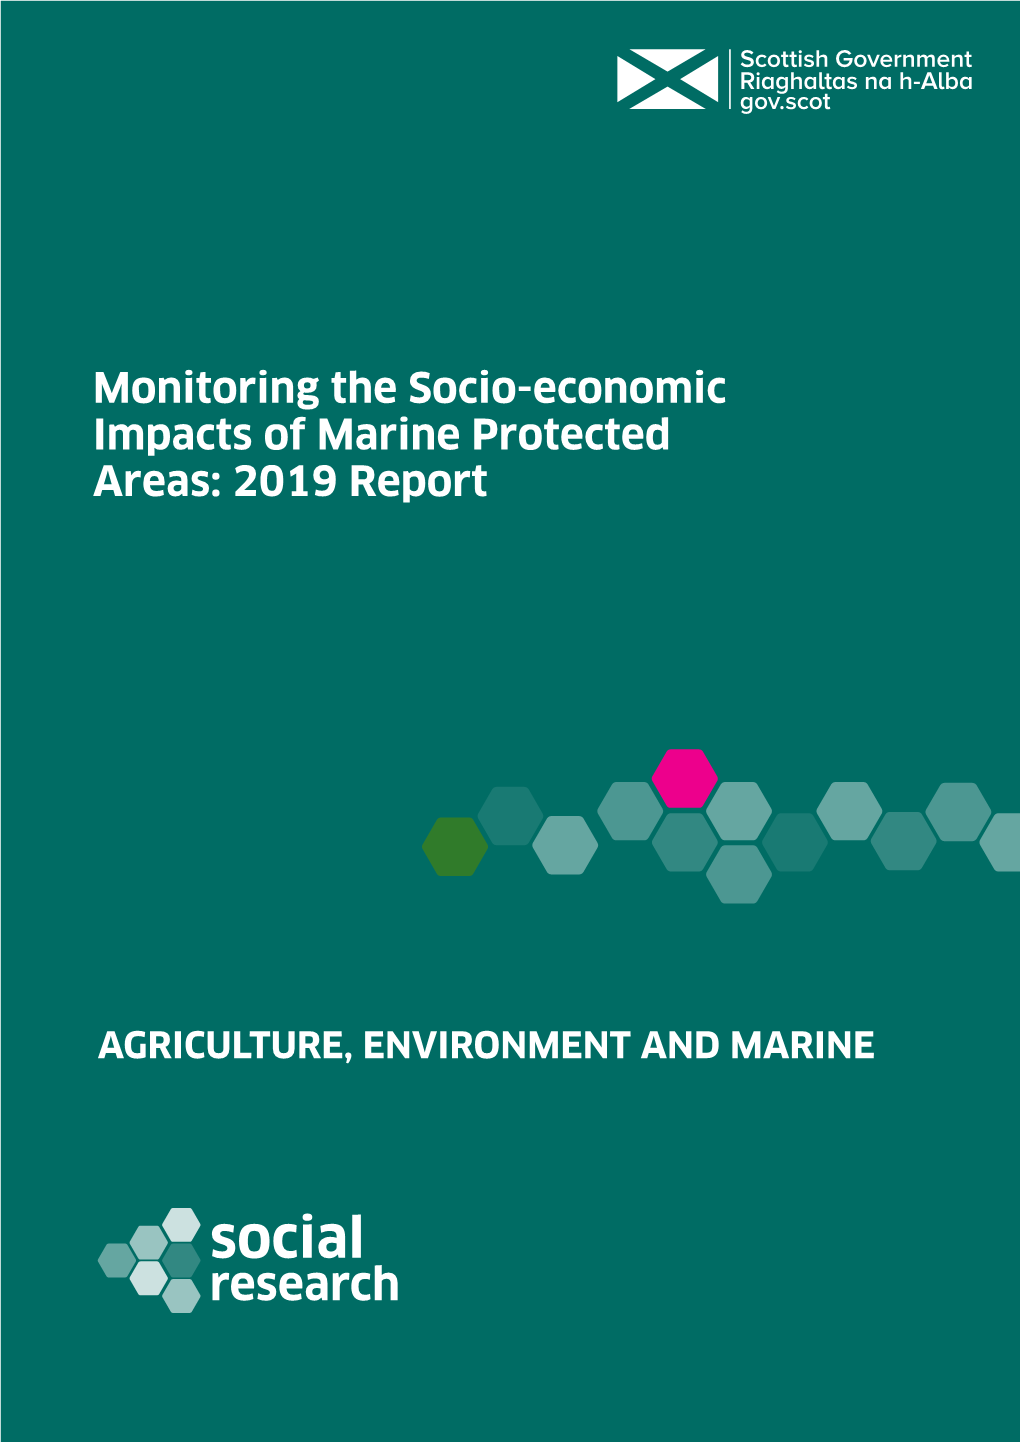 Monitoring the Socio-Economic Impacts of Marine Protected Areas: 2019 Report